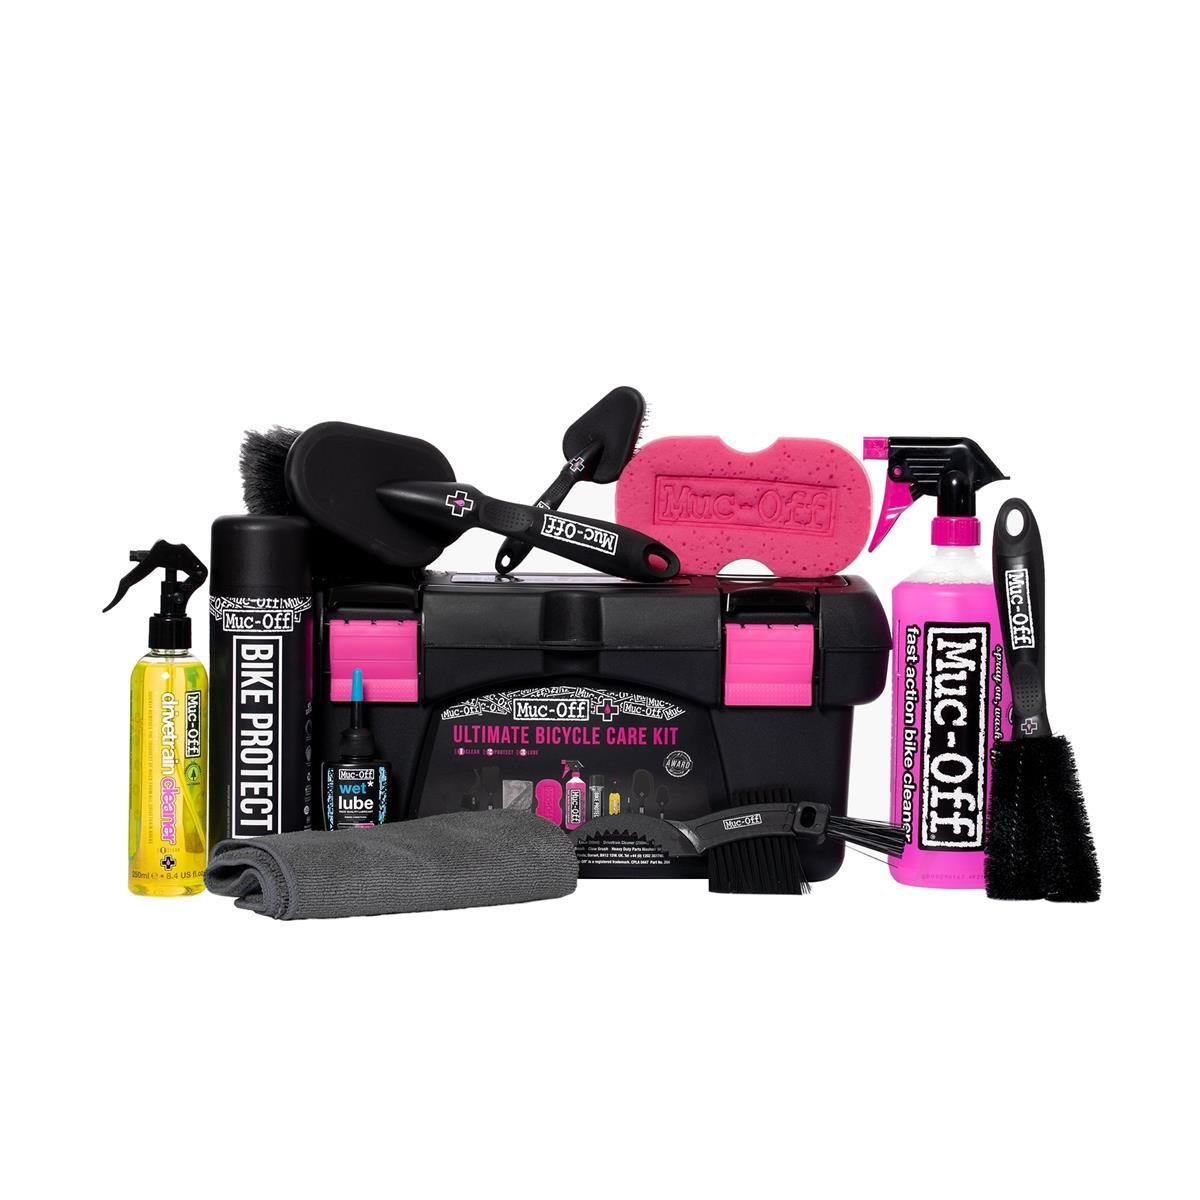 Muc-Off Detergente Bici Ultimate Bicycle Clean Kit completo 10 in 1